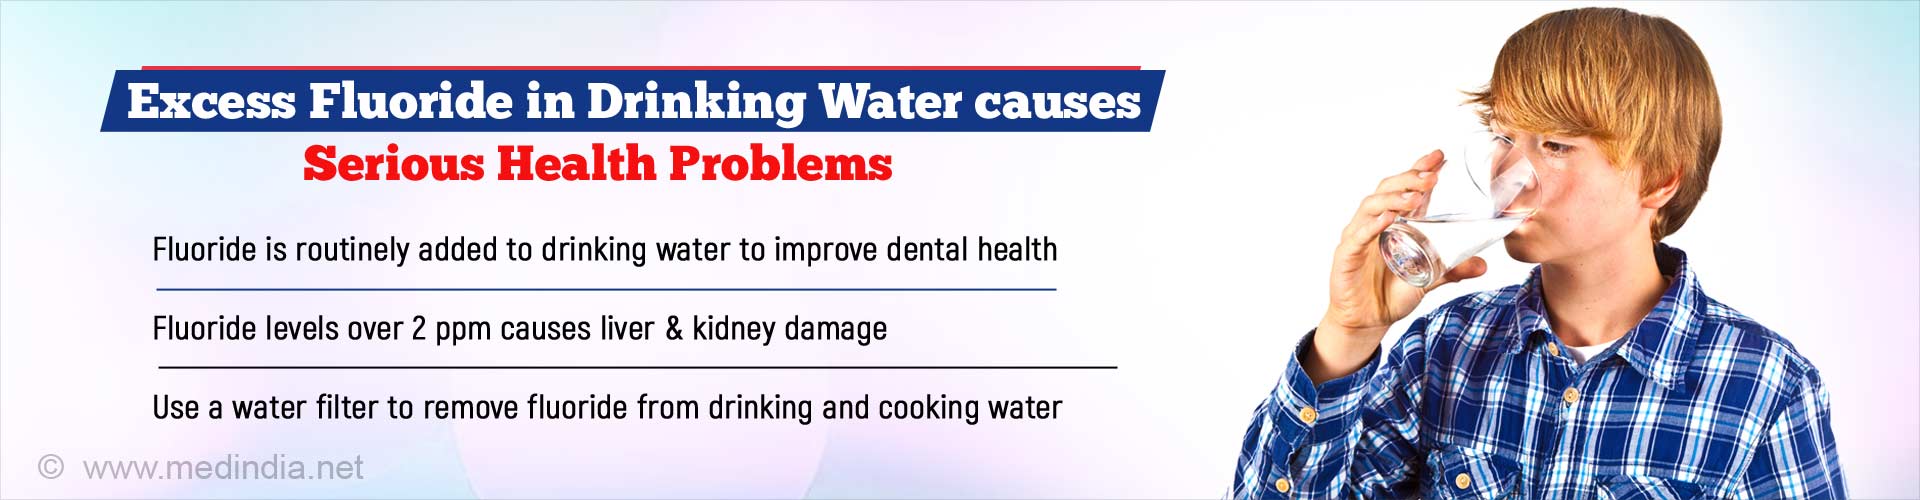 Excess fluoride in drinking water causes serious health problems. Fluoride is routinely added to drinking water to improve dental health. Chronic exposure to fluoride causes liver and kidney damage in adolescents. Use a water filter to remove fluoride from drinking and cooking water.